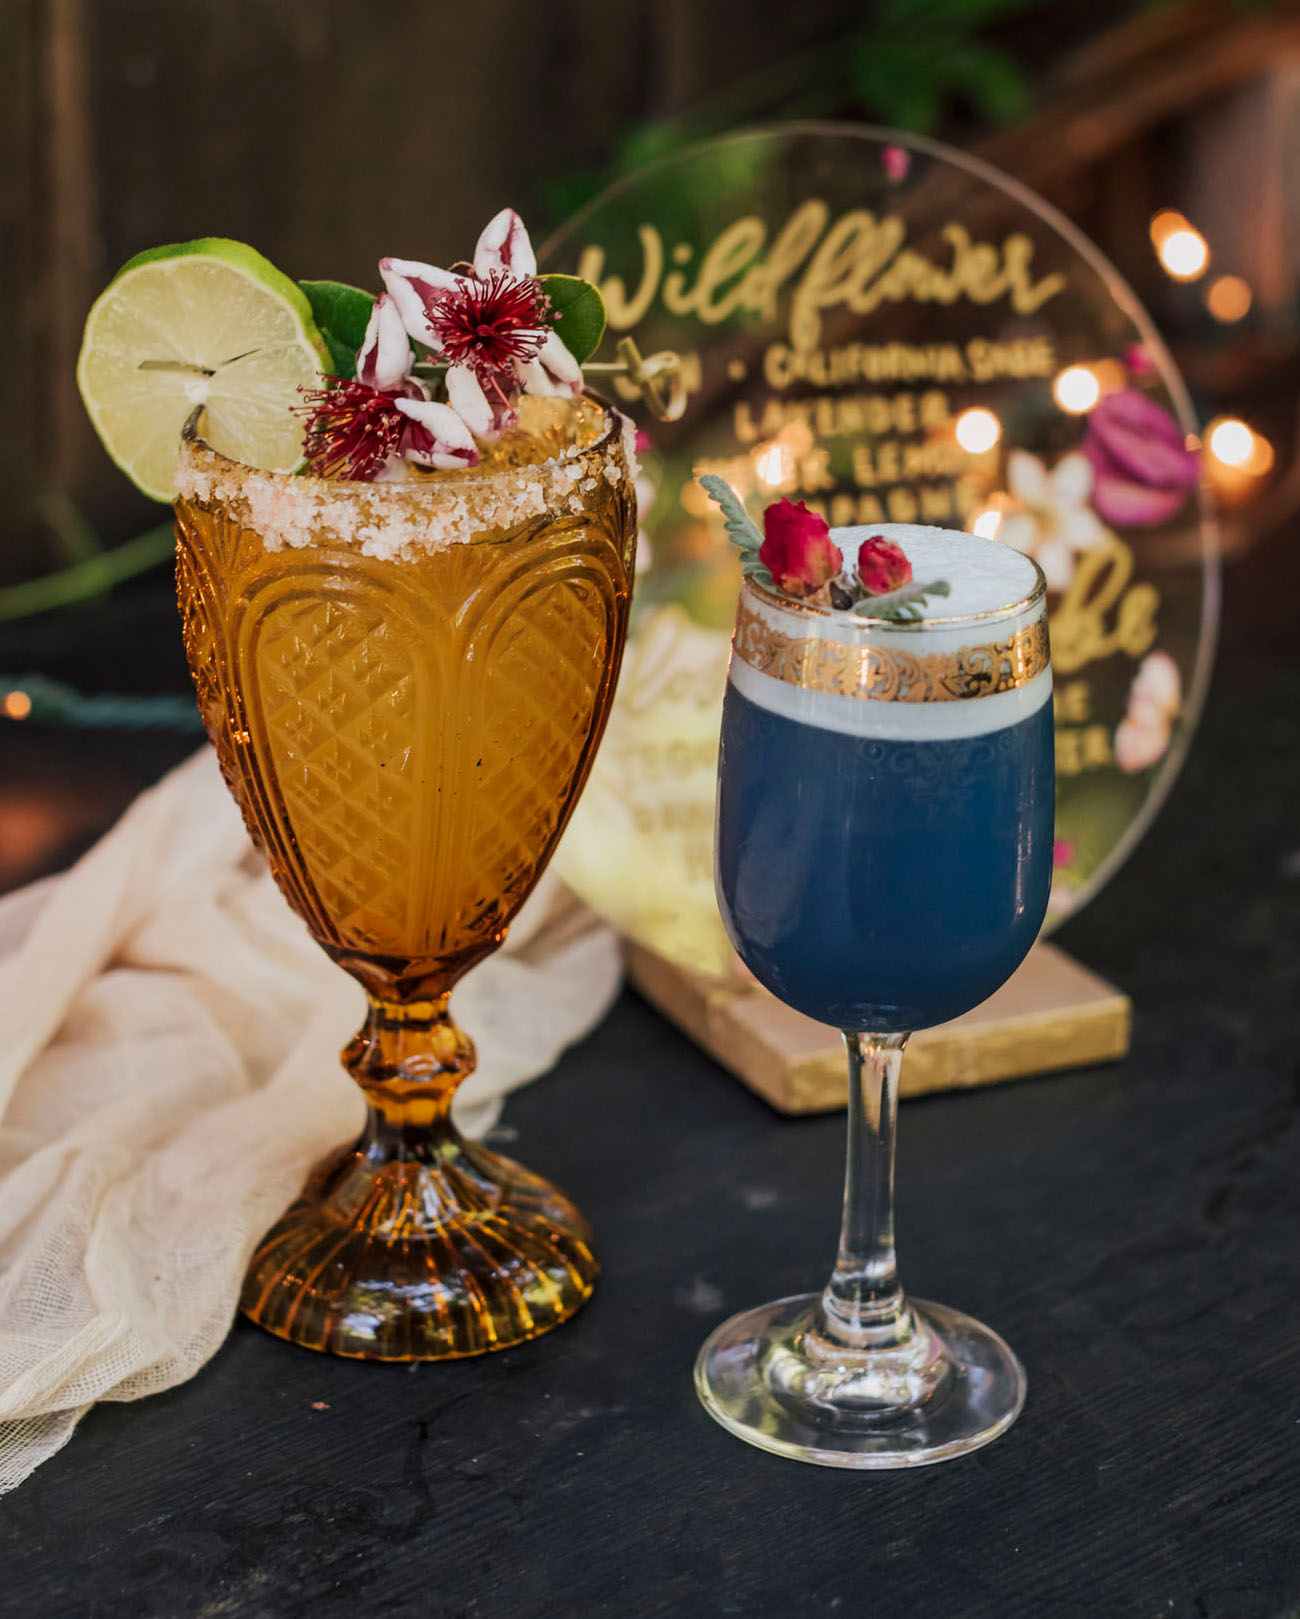 Amazing tropical drinks were mixed right for the wedding shoot